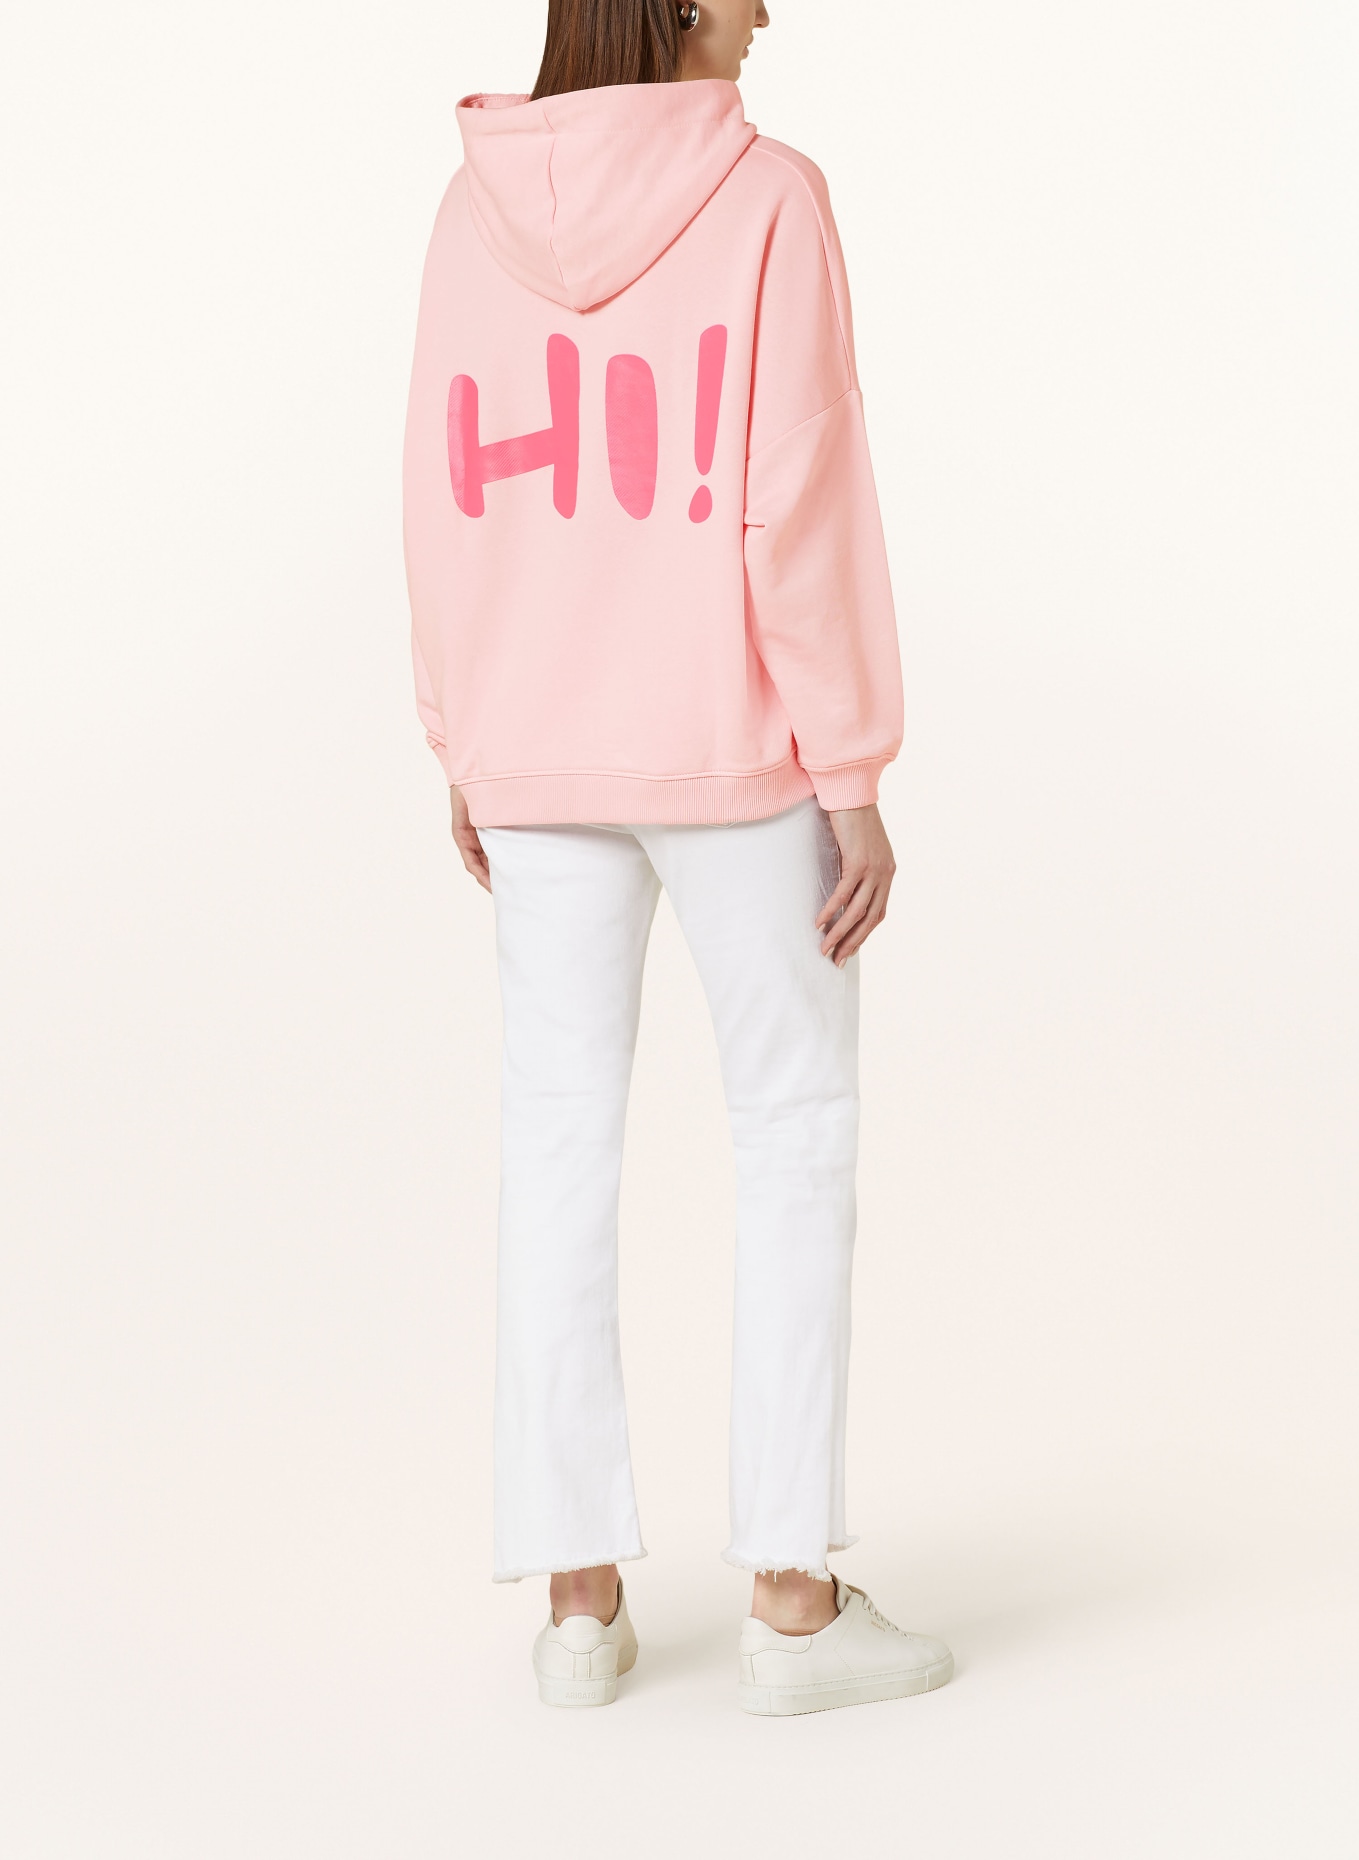 miss goodlife Hoodie with decorative gems, Color: LIGHT PINK (Image 3)